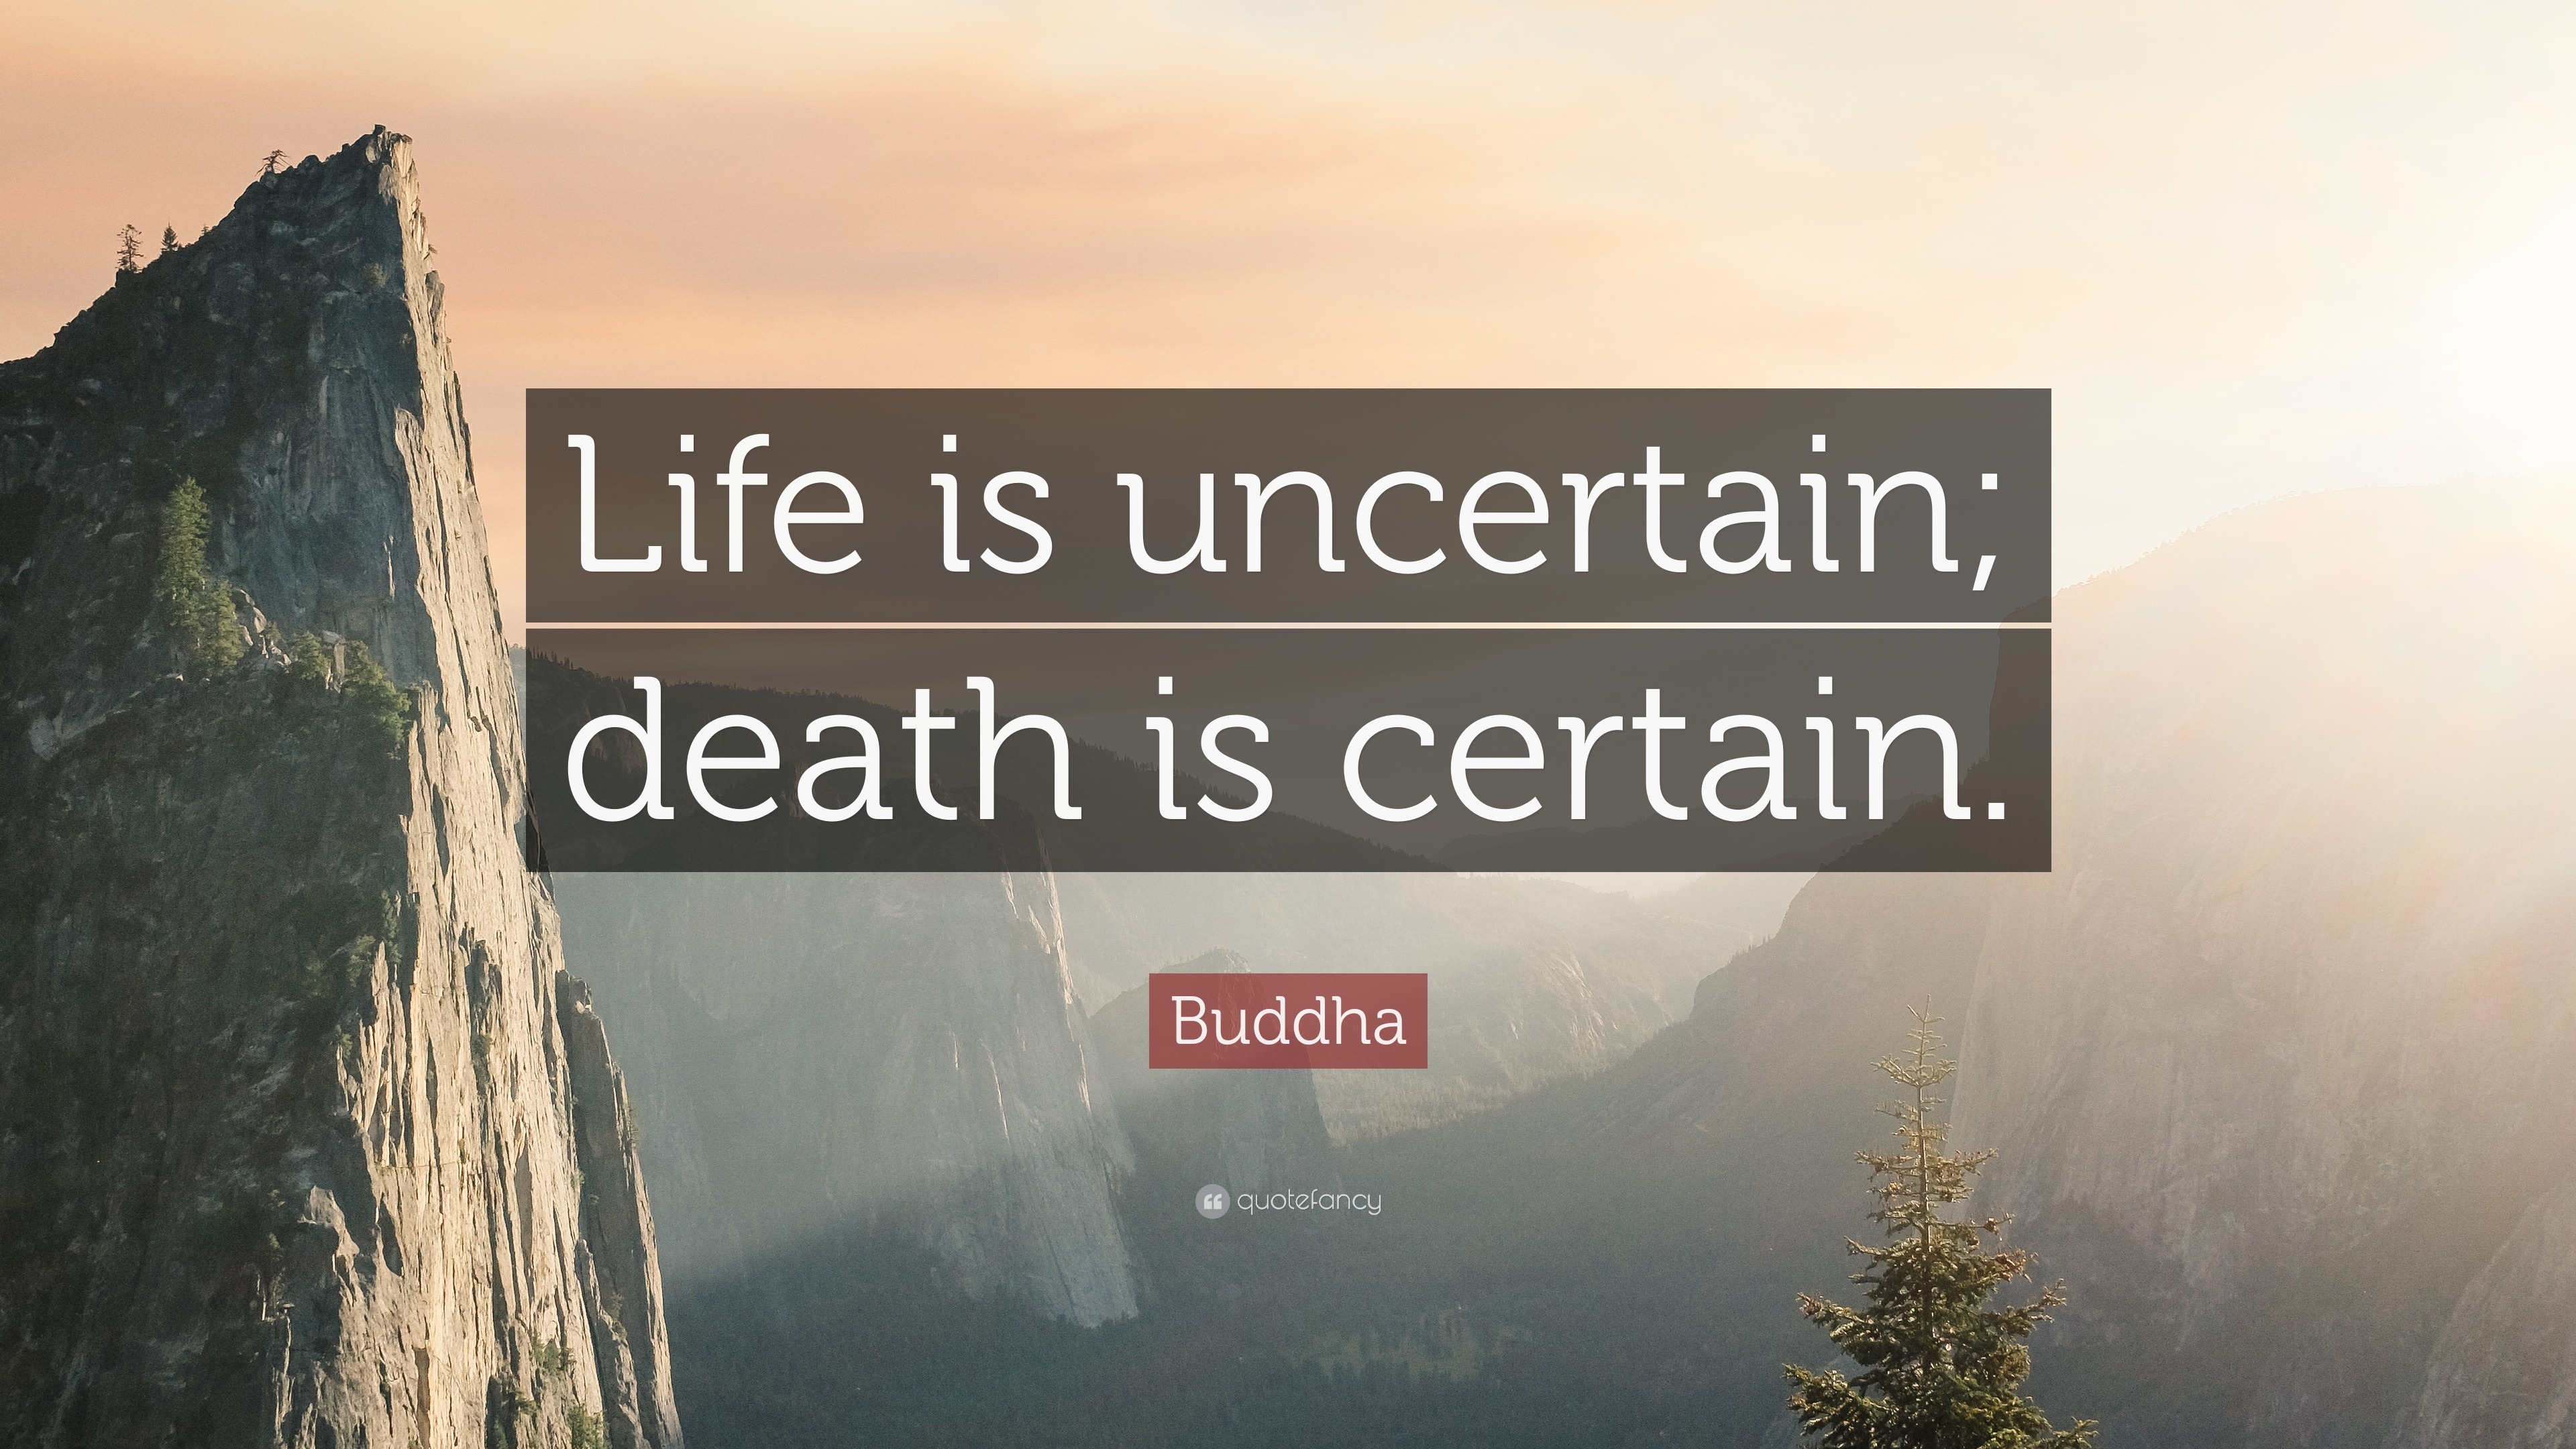 Life is uncertain death is